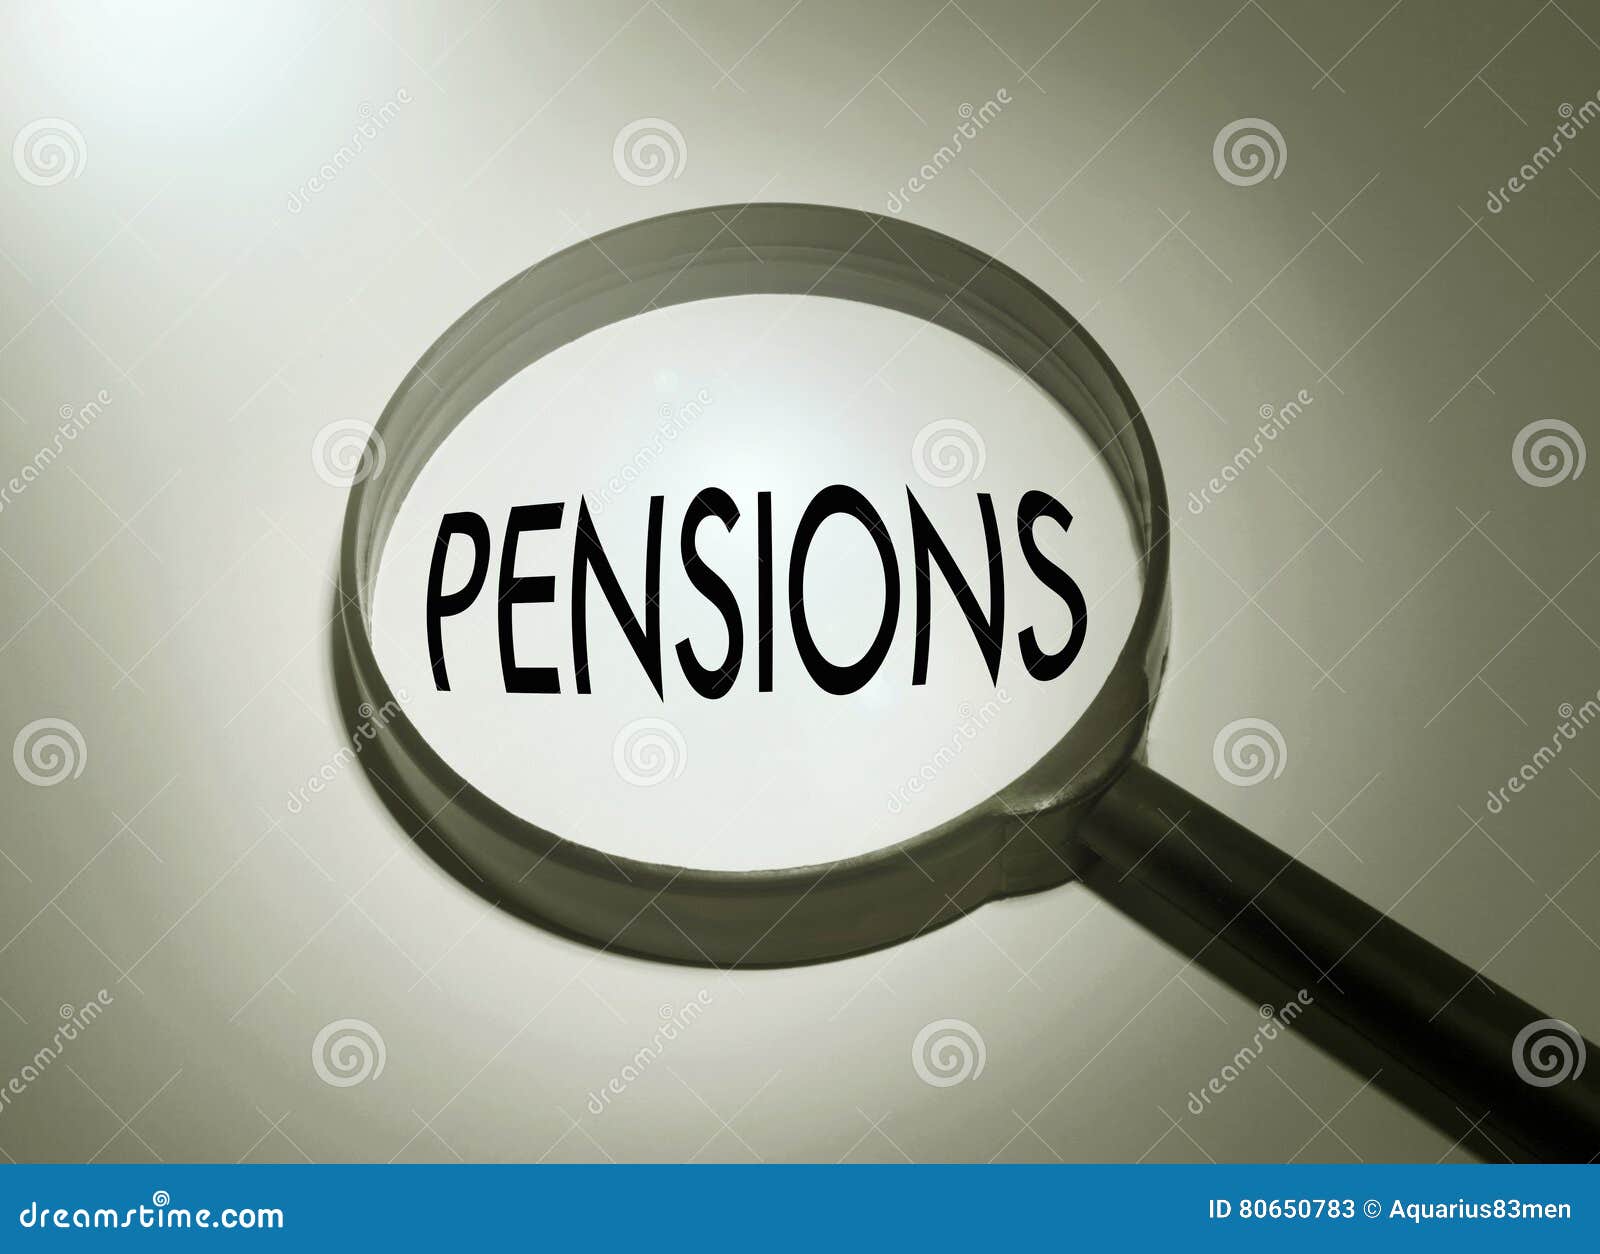 searching pensions